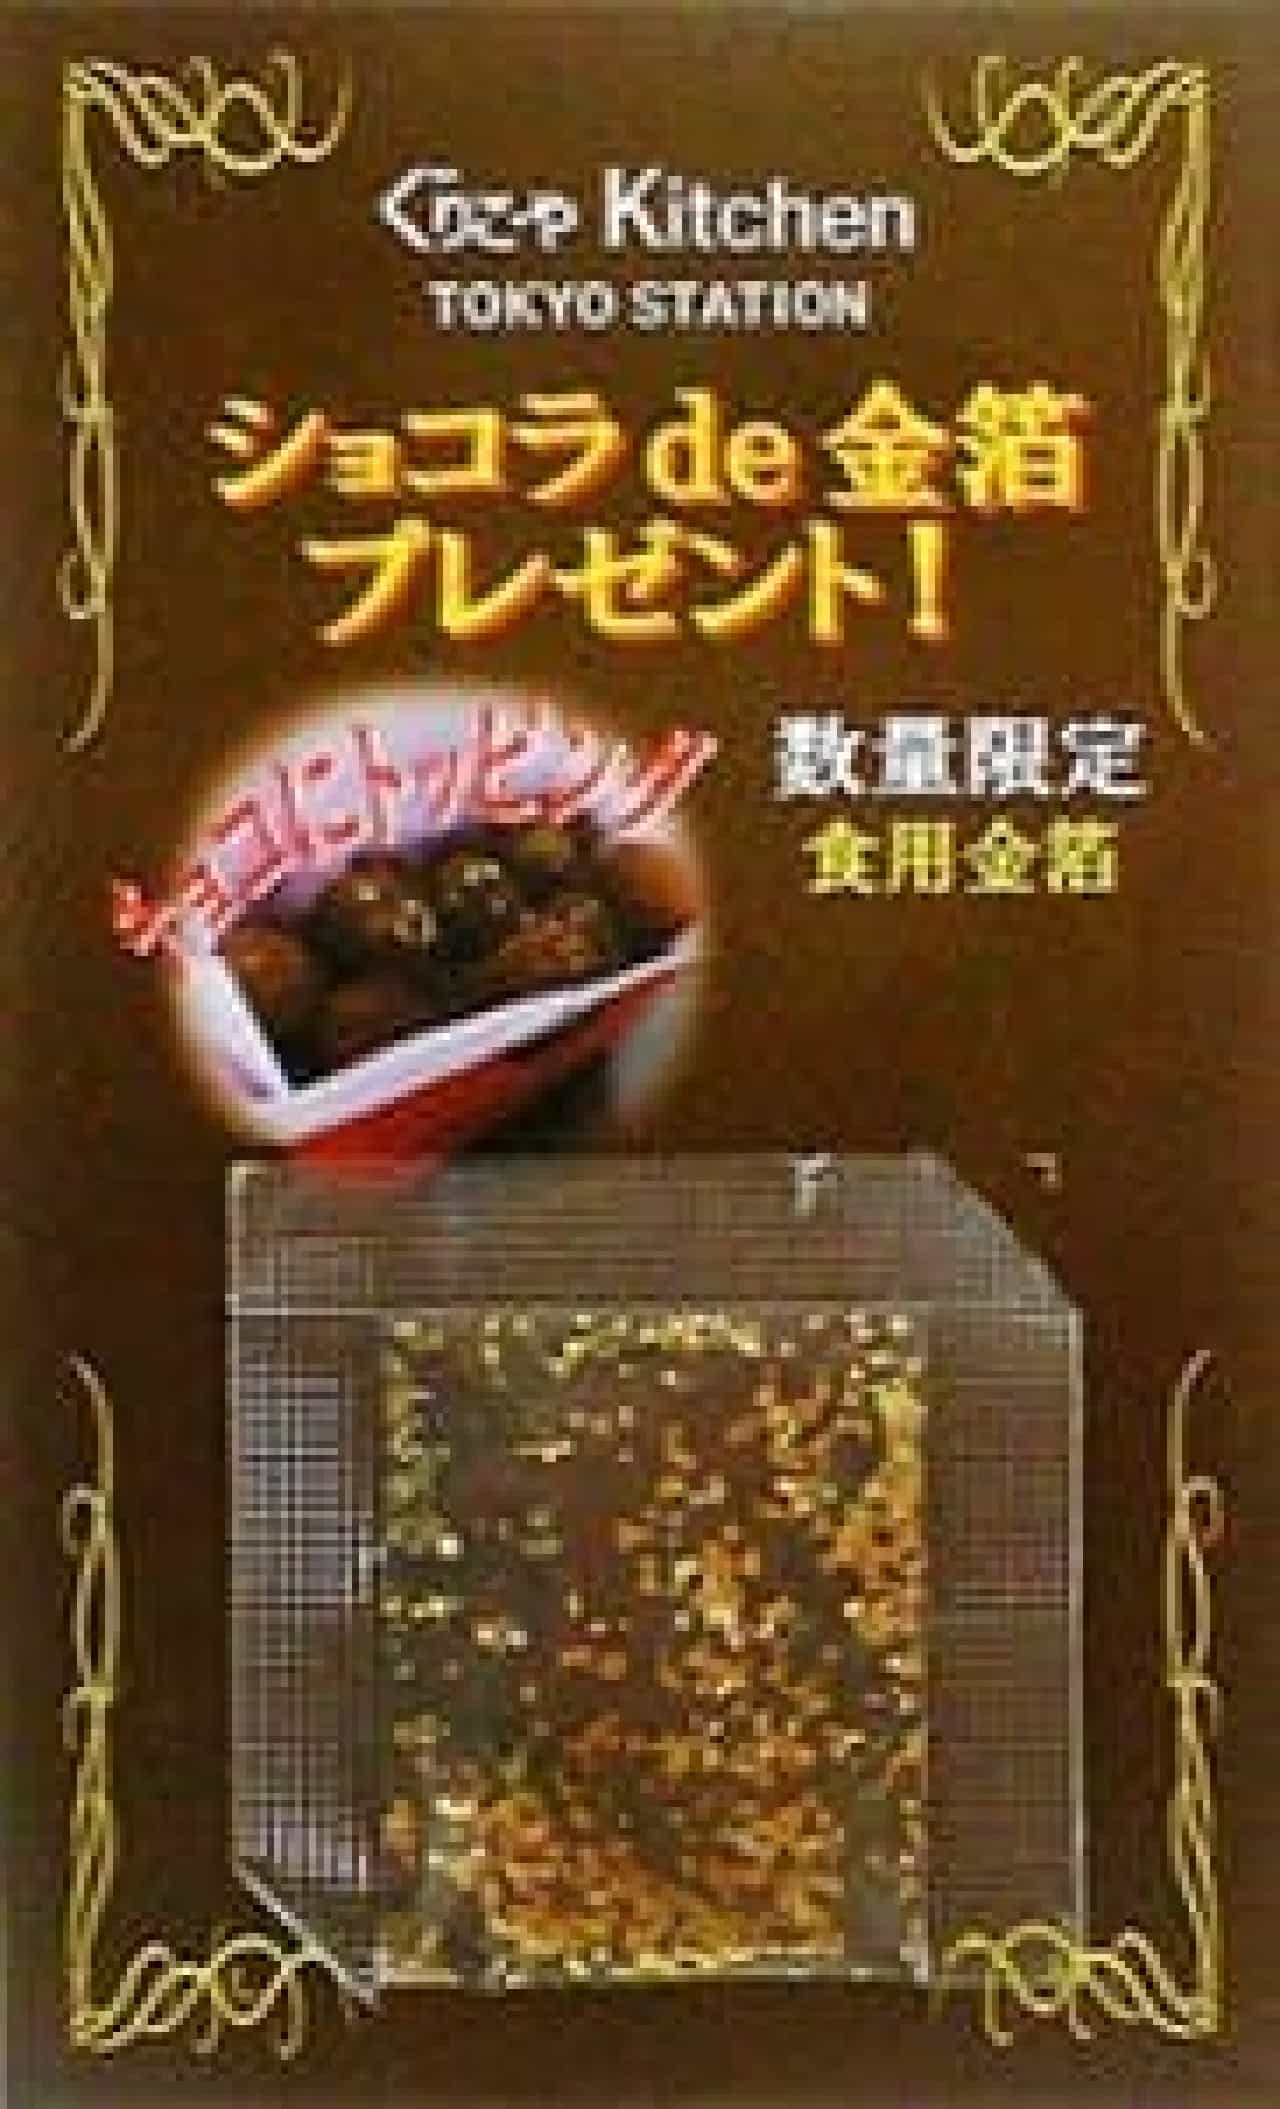 There is also a campaign to get edible gold leaf